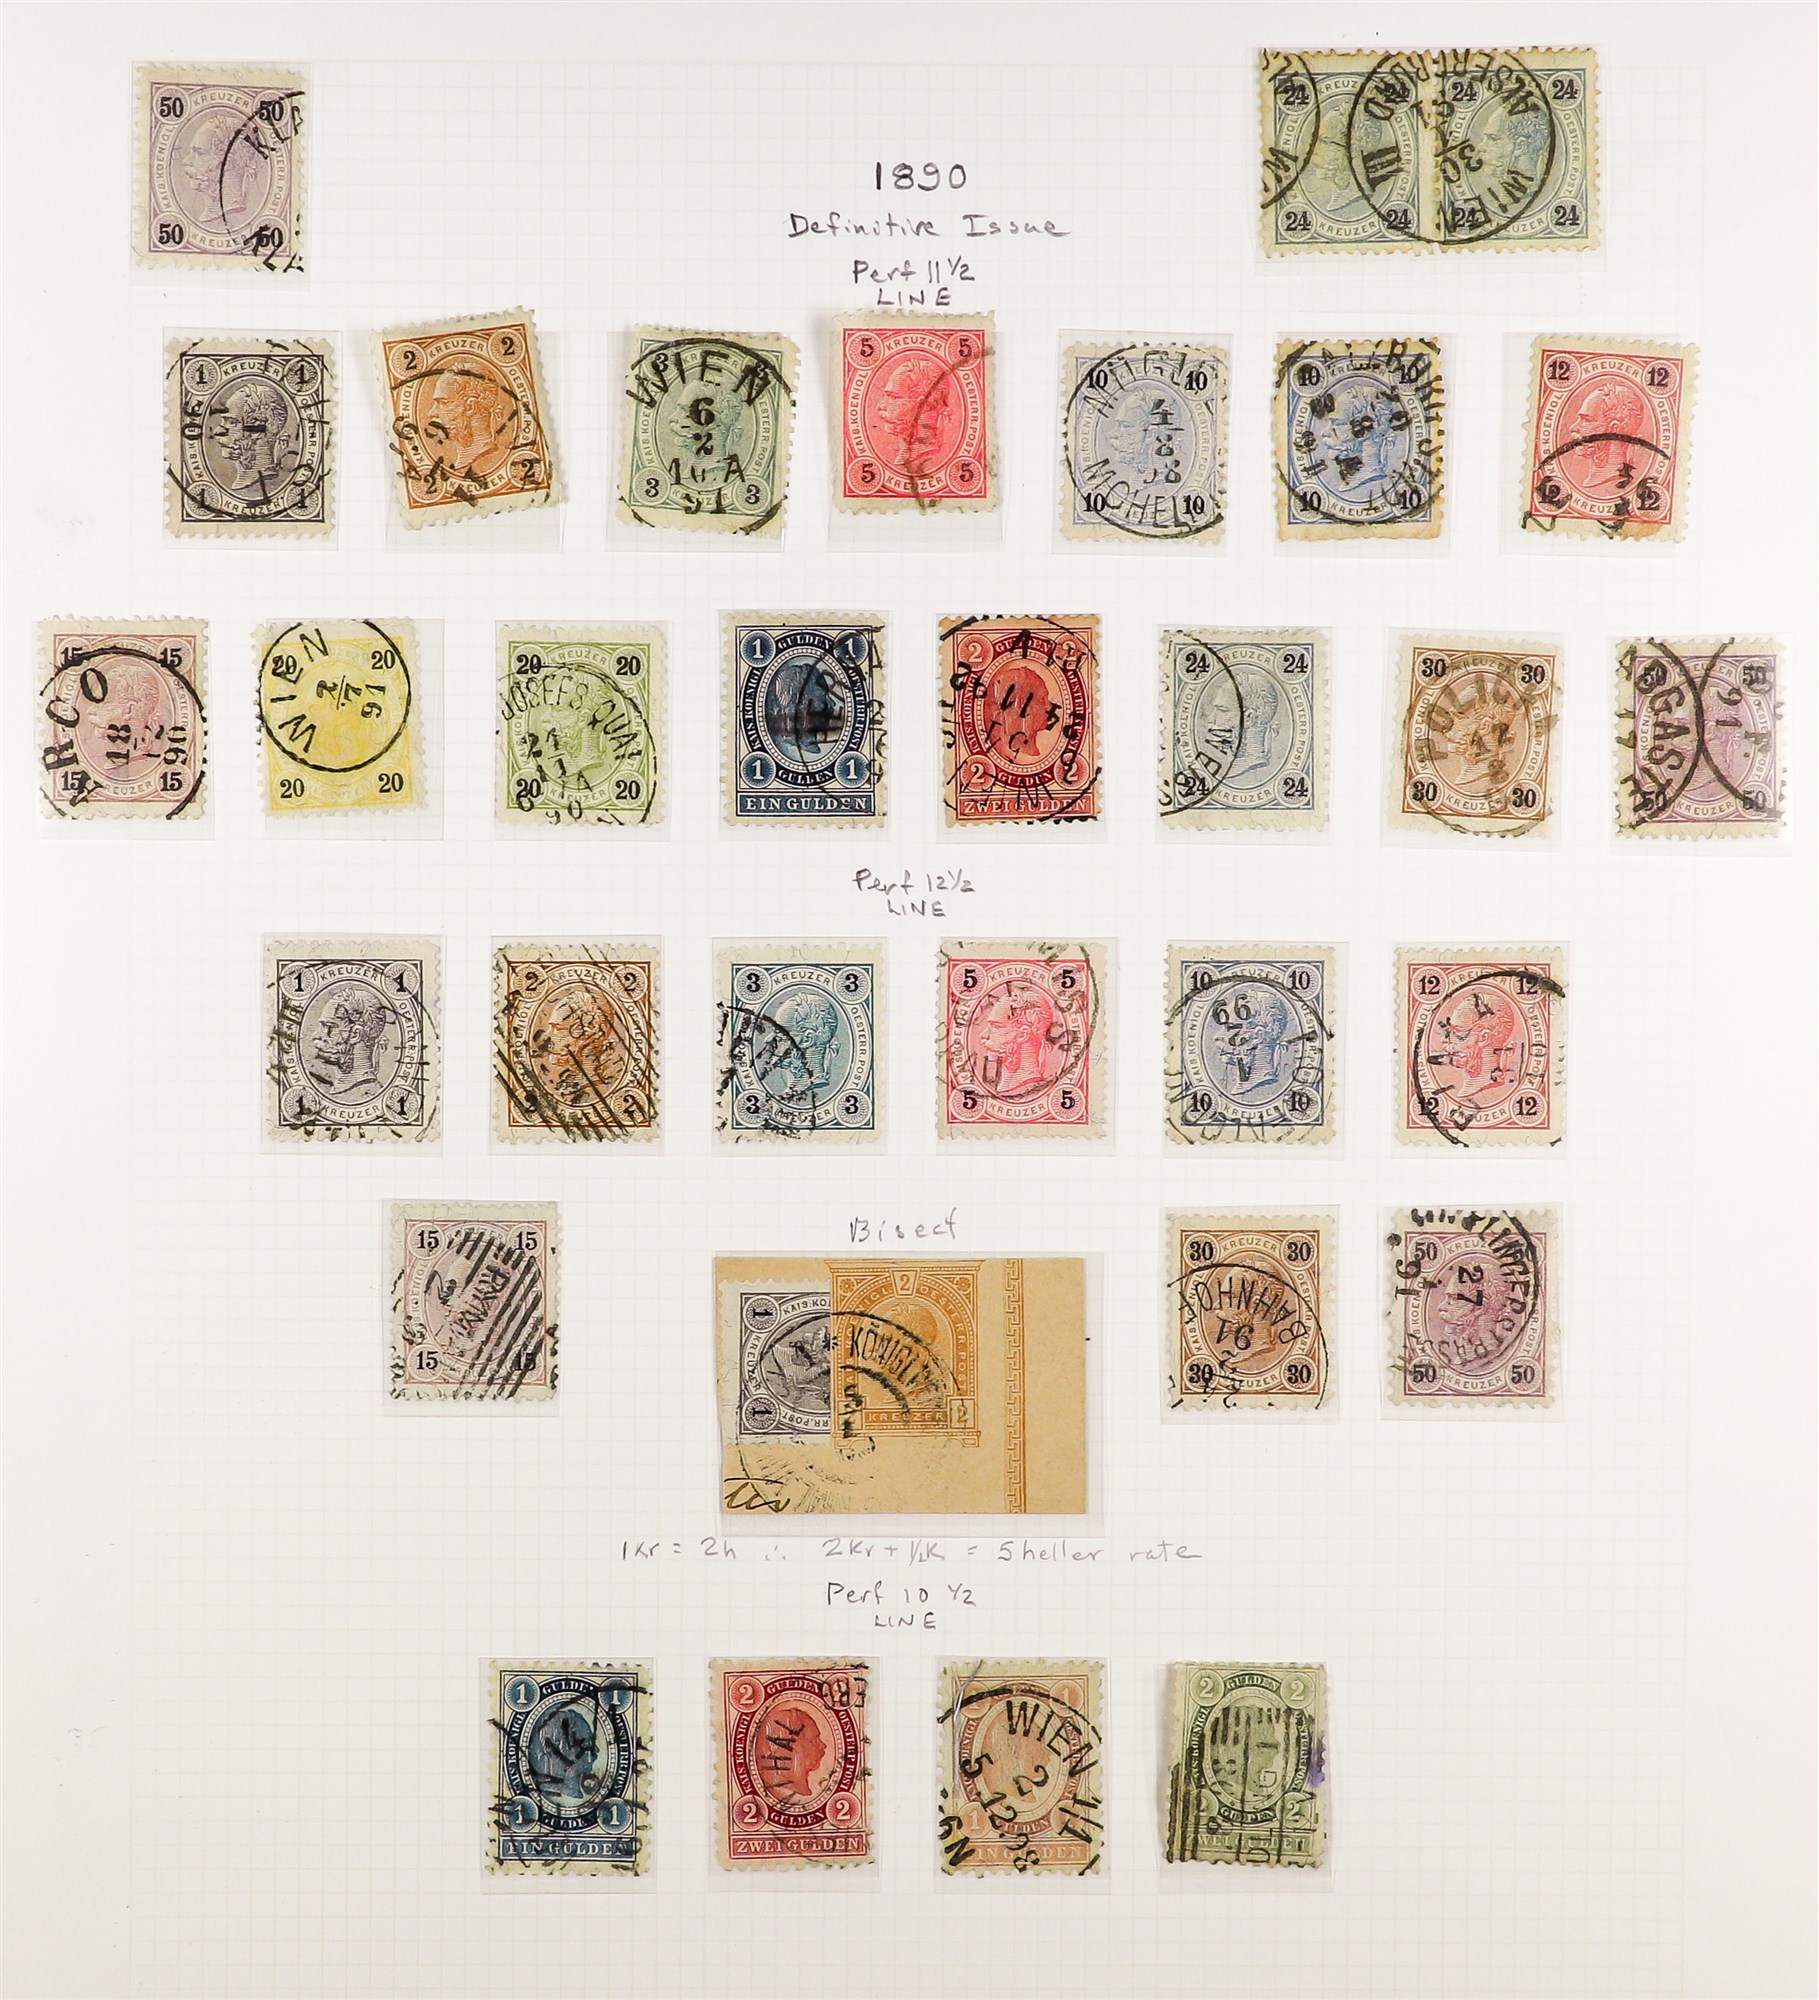 AUSTRIA 1890 - 1907 FRANZ JOSEF DEFINITIVES collection of over 300 stamps on album pages, semi- - Image 3 of 13